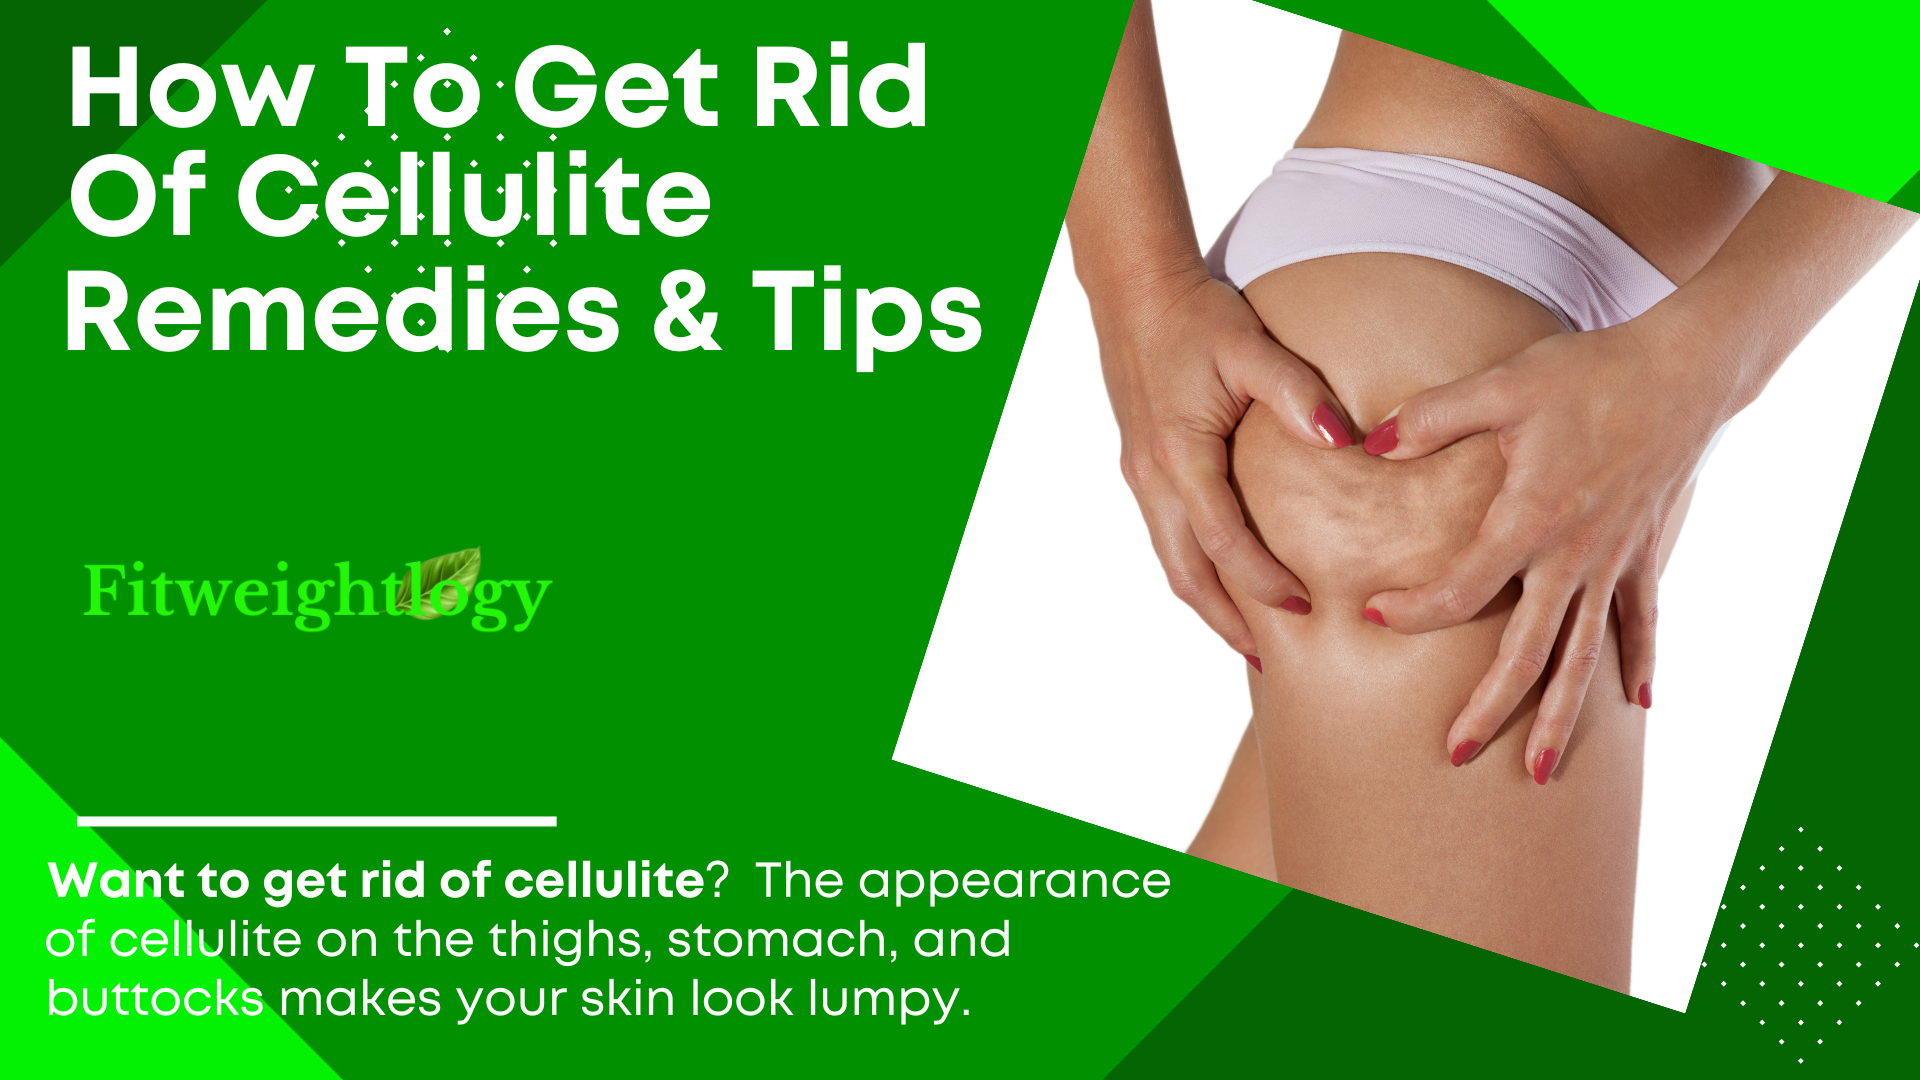 How To Get Rid Of Cellulite On Tighs - Remedies & Dermatologist Tips